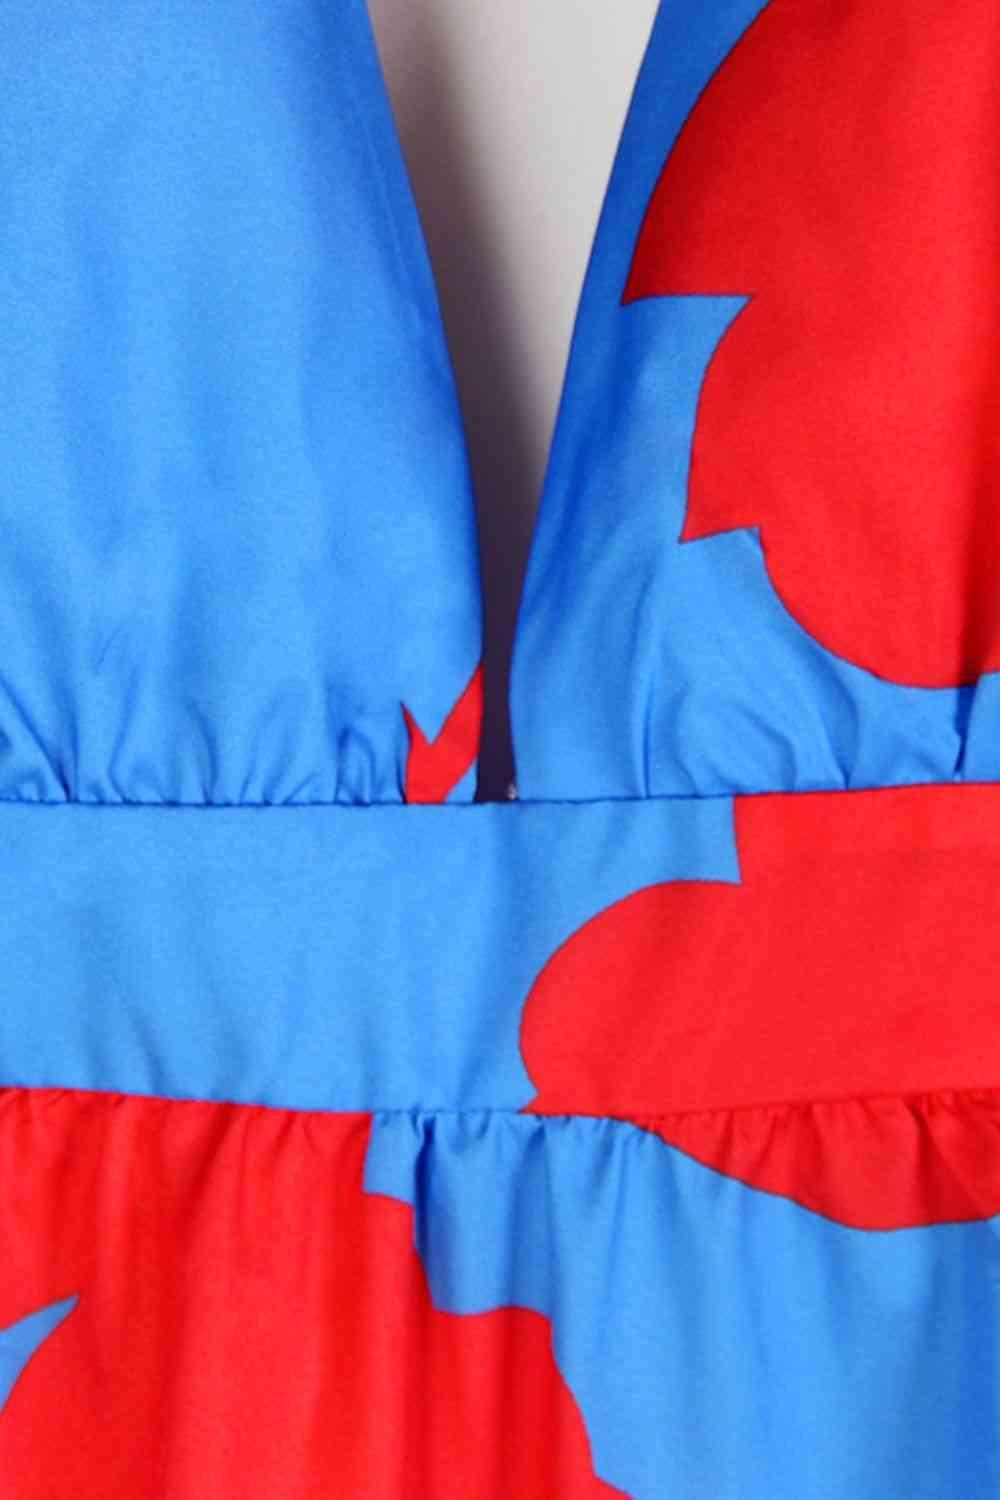 a blue and red dress with a red and blue design